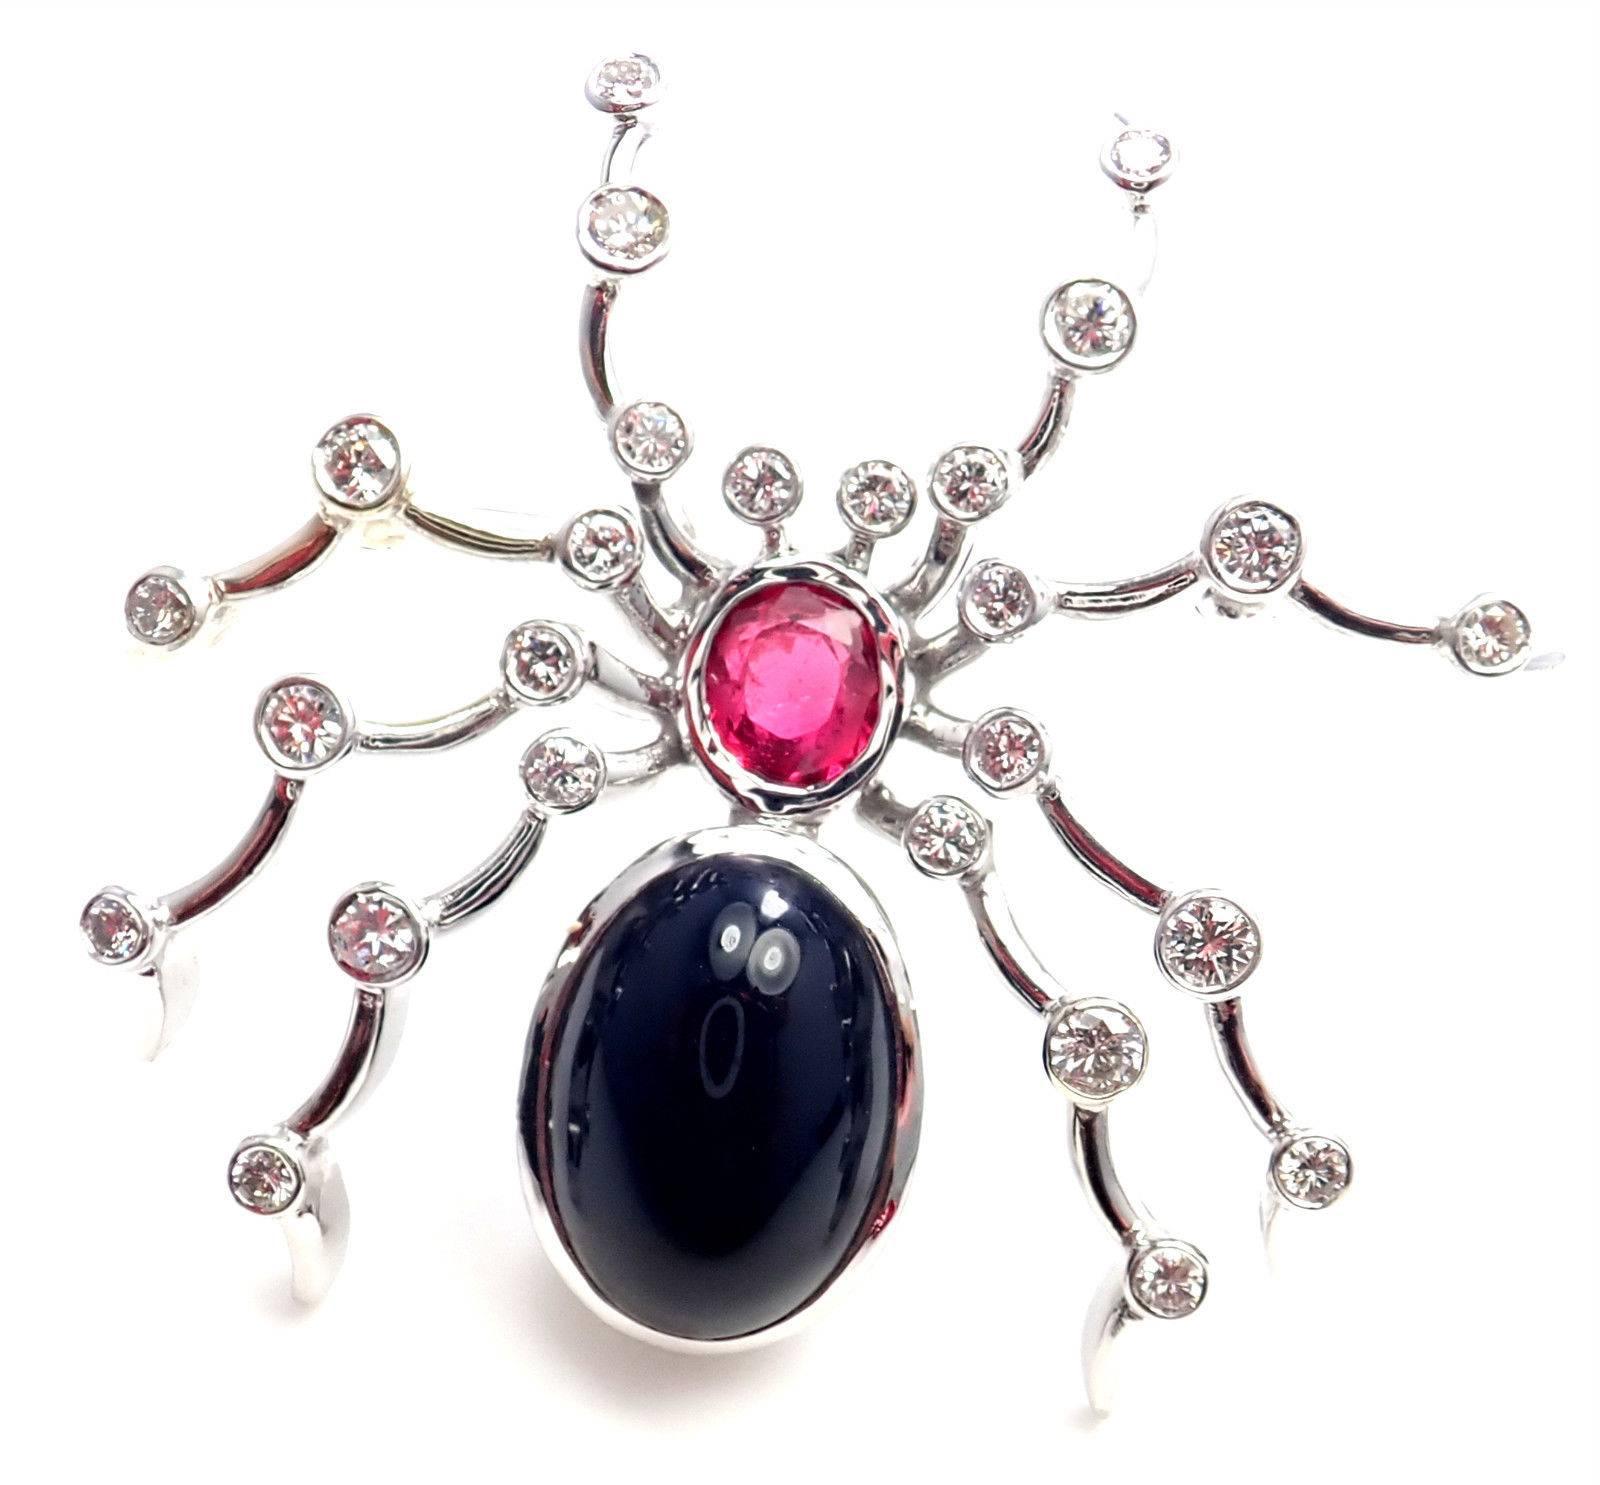 18k White Gold Diamond Ruby Black Onyx Spider Pin Brooch by Paloma Picasso for Tiffany & Co. 
With 26 round brilliant cut diamonds VS1 clarity, G color total weight approx. 1ct
1 ruby 8mm x 4mm
1 black onyx 14mm x 11mm
Details: 
Measurements: 1 1/2